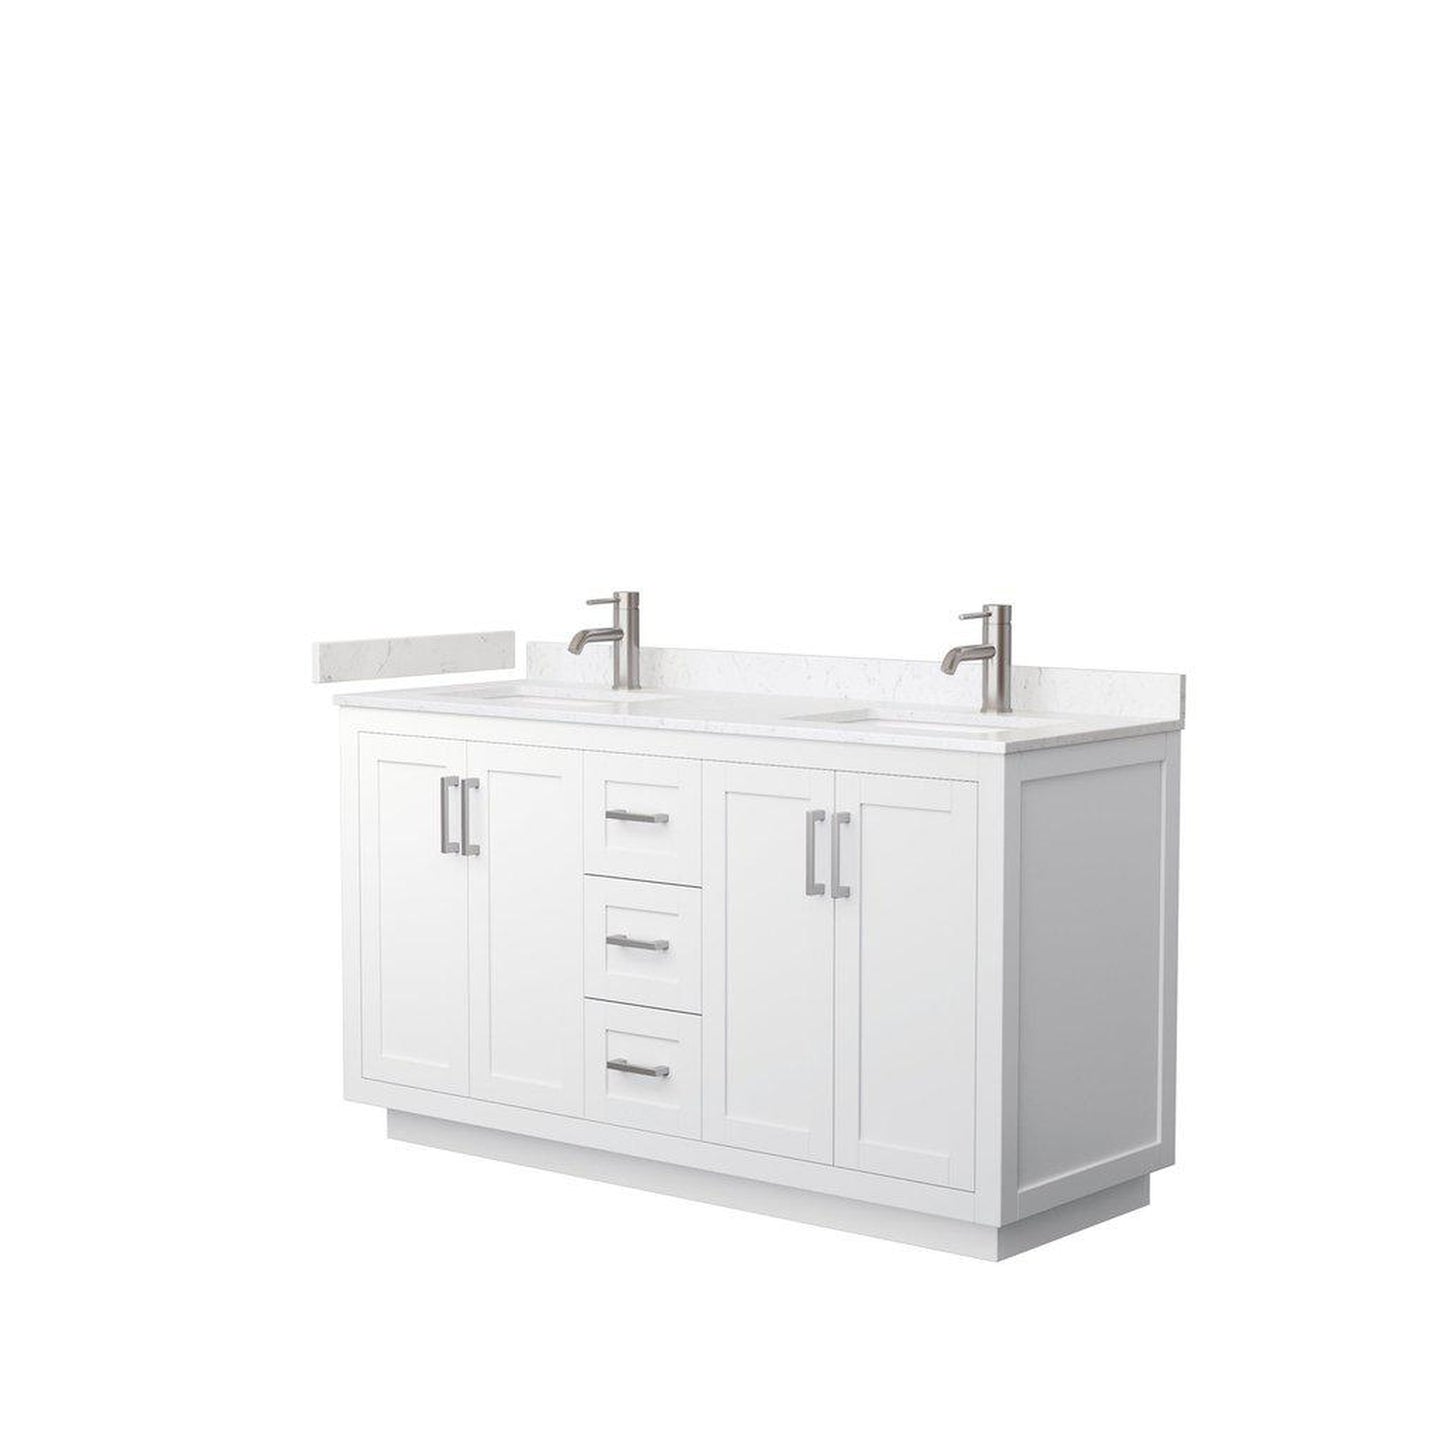 Wyndham Collection Miranda 60" Double Bathroom White Vanity Set With Light-Vein Carrara Cultured Marble Countertop, Undermount Square Sink, And Brushed Nickel Trim